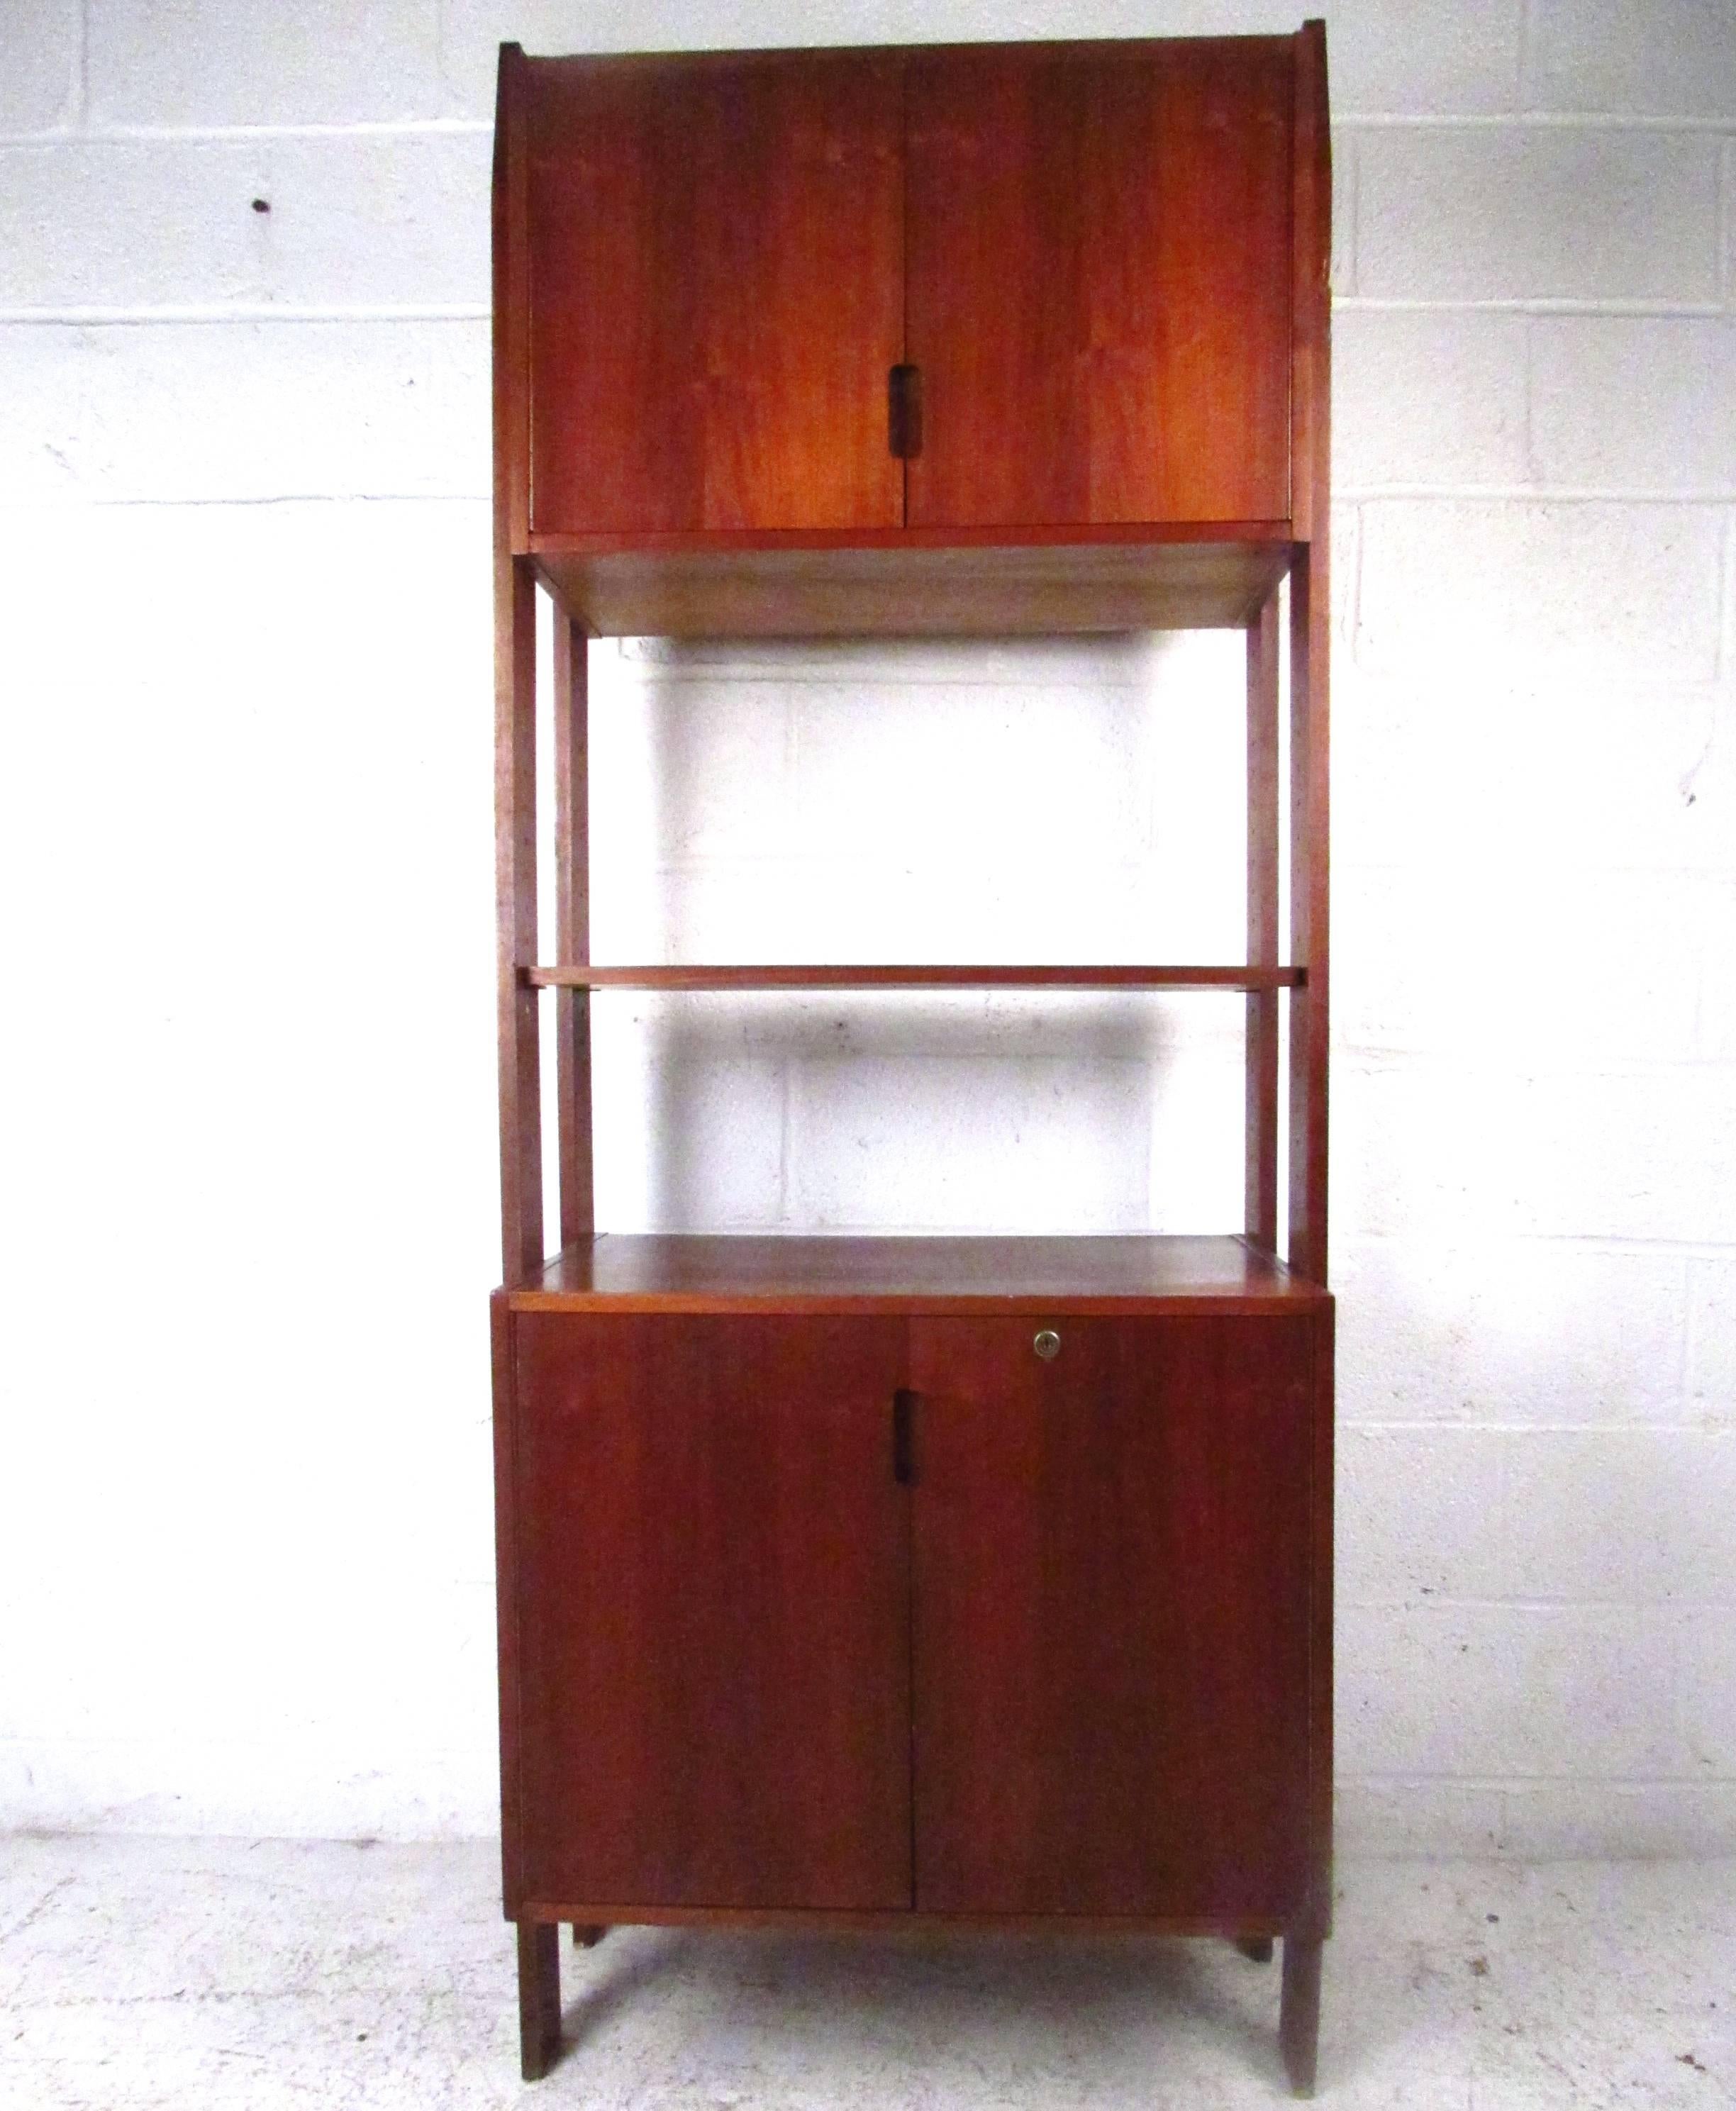 This vintage freestanding unit makes a wonderful addition to any home or office. Dual cabinets, including a lower record cabinet, make this ideal for mixed storage and display. Please confirm item location (NY or NJ).